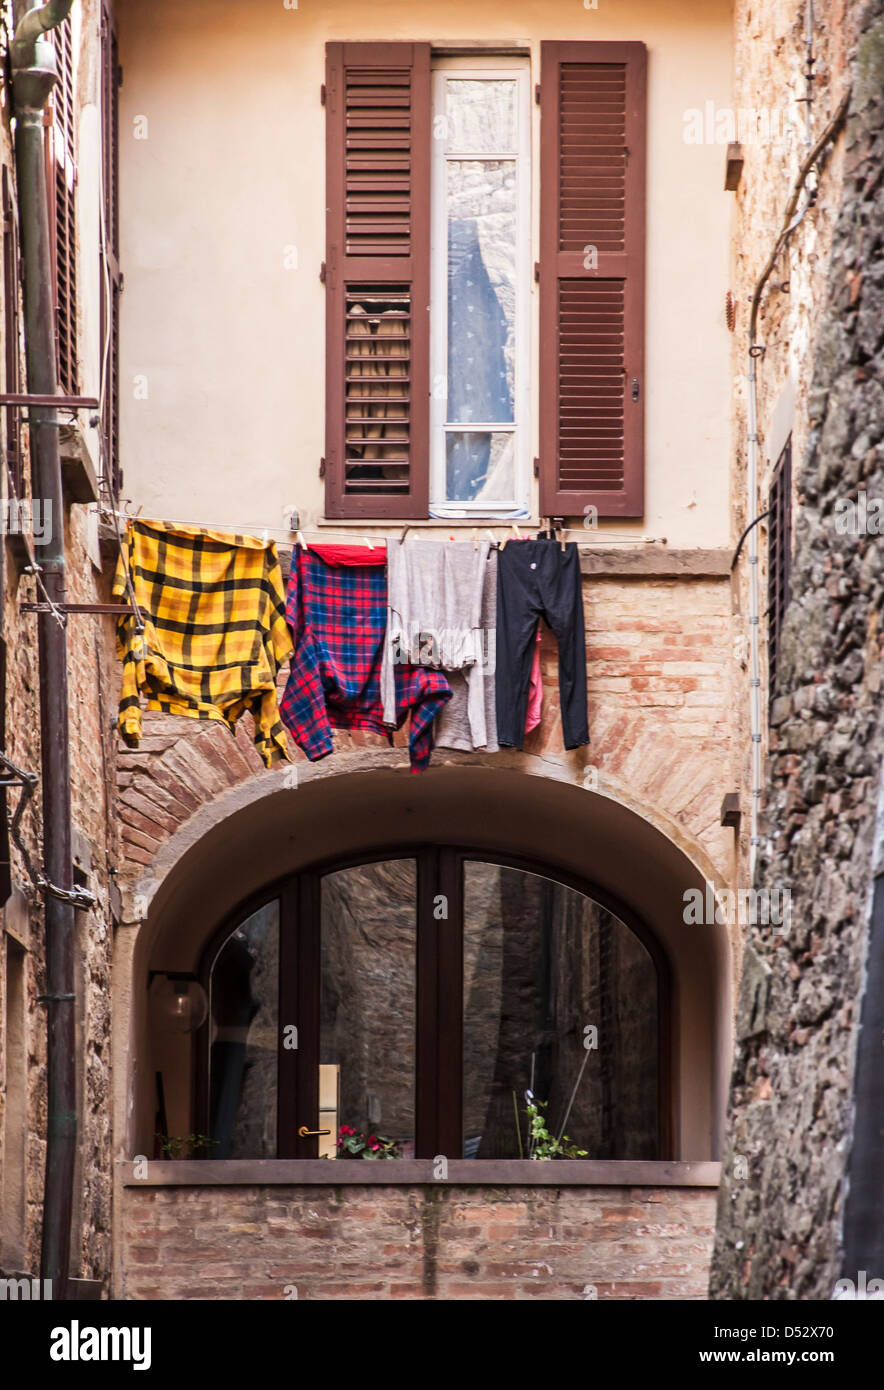 window's village in central italy Stock Photo